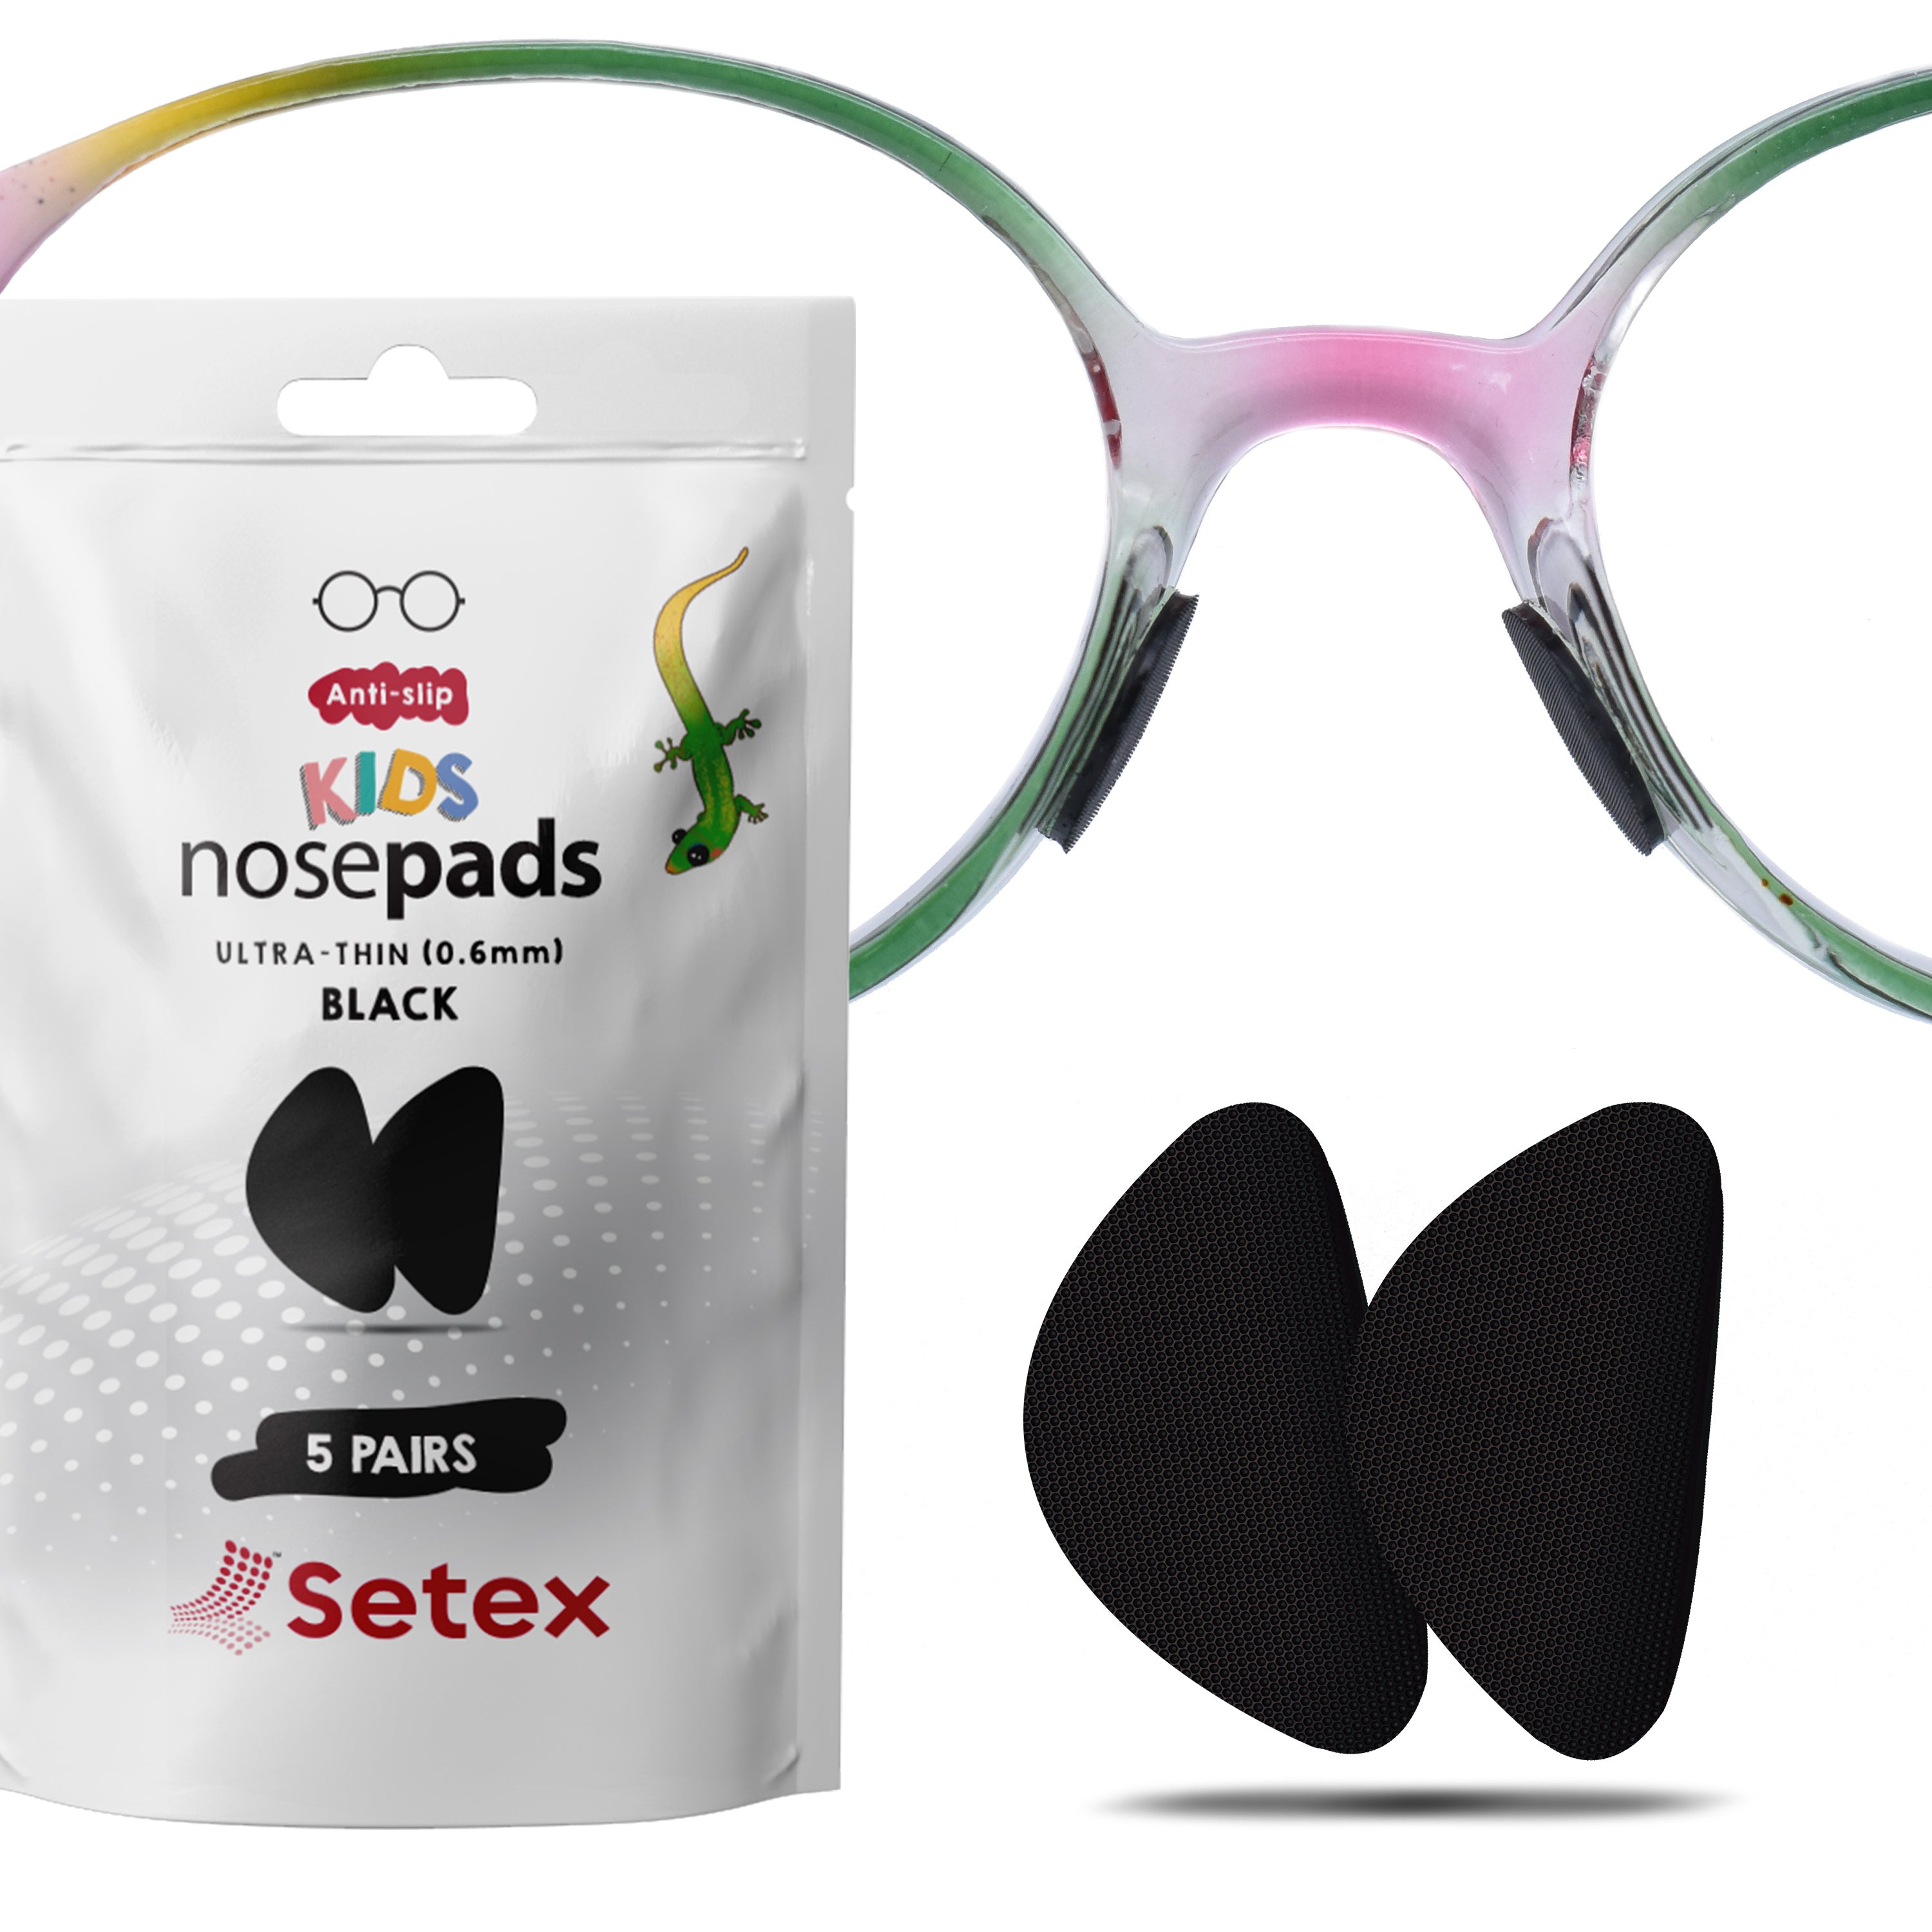 UV Nose Guards for Glasses - Nose Sun Protection - Sun Nose Guard